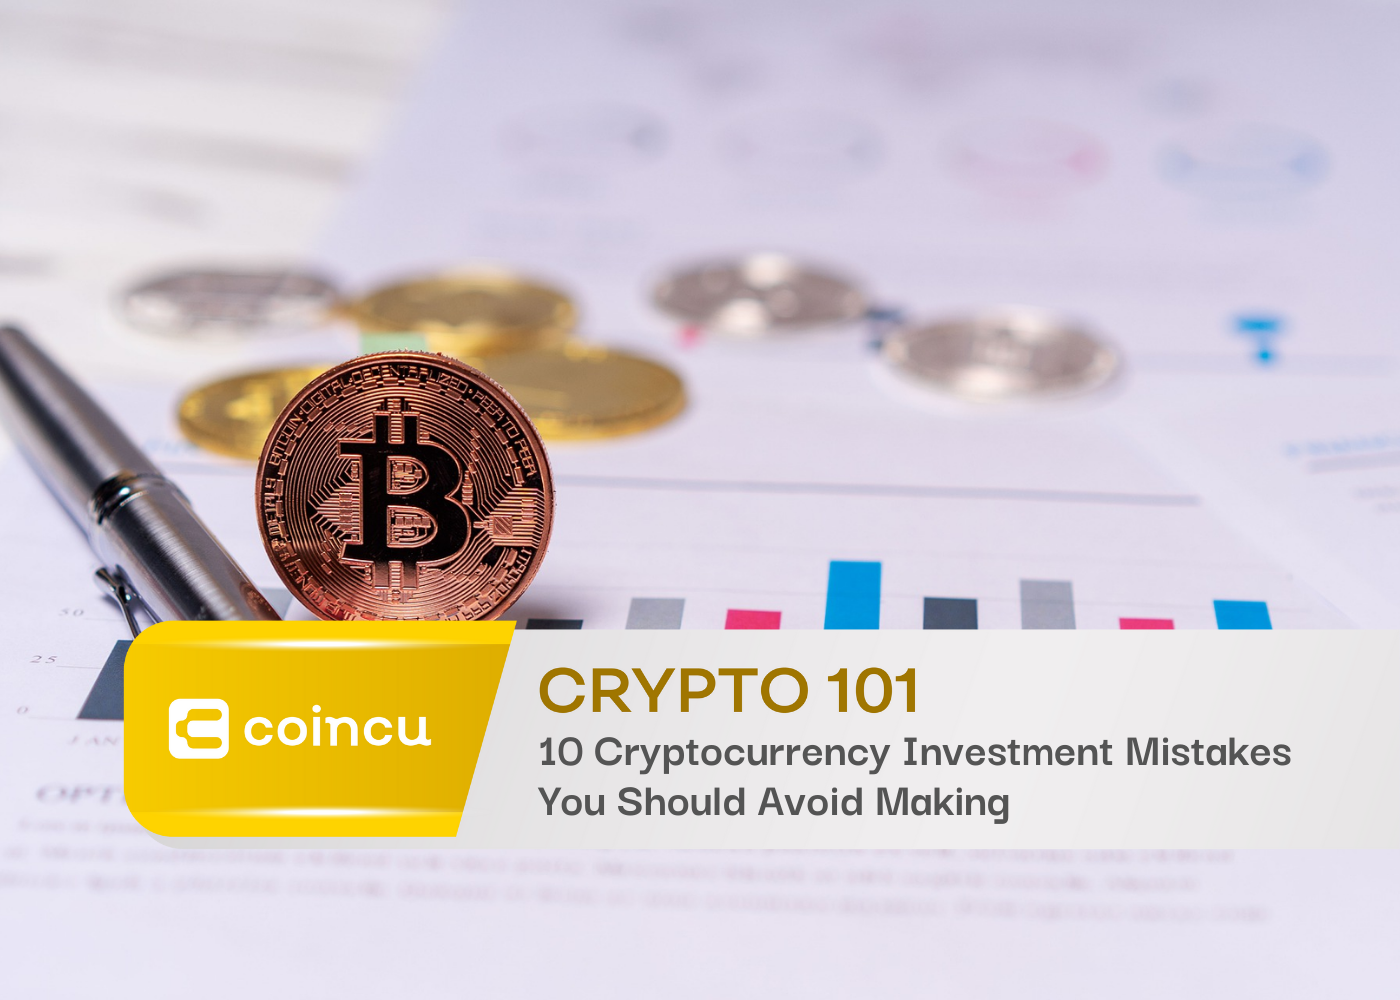 10 Cryptocurrency Investment Mistakes you Should Avoid Making